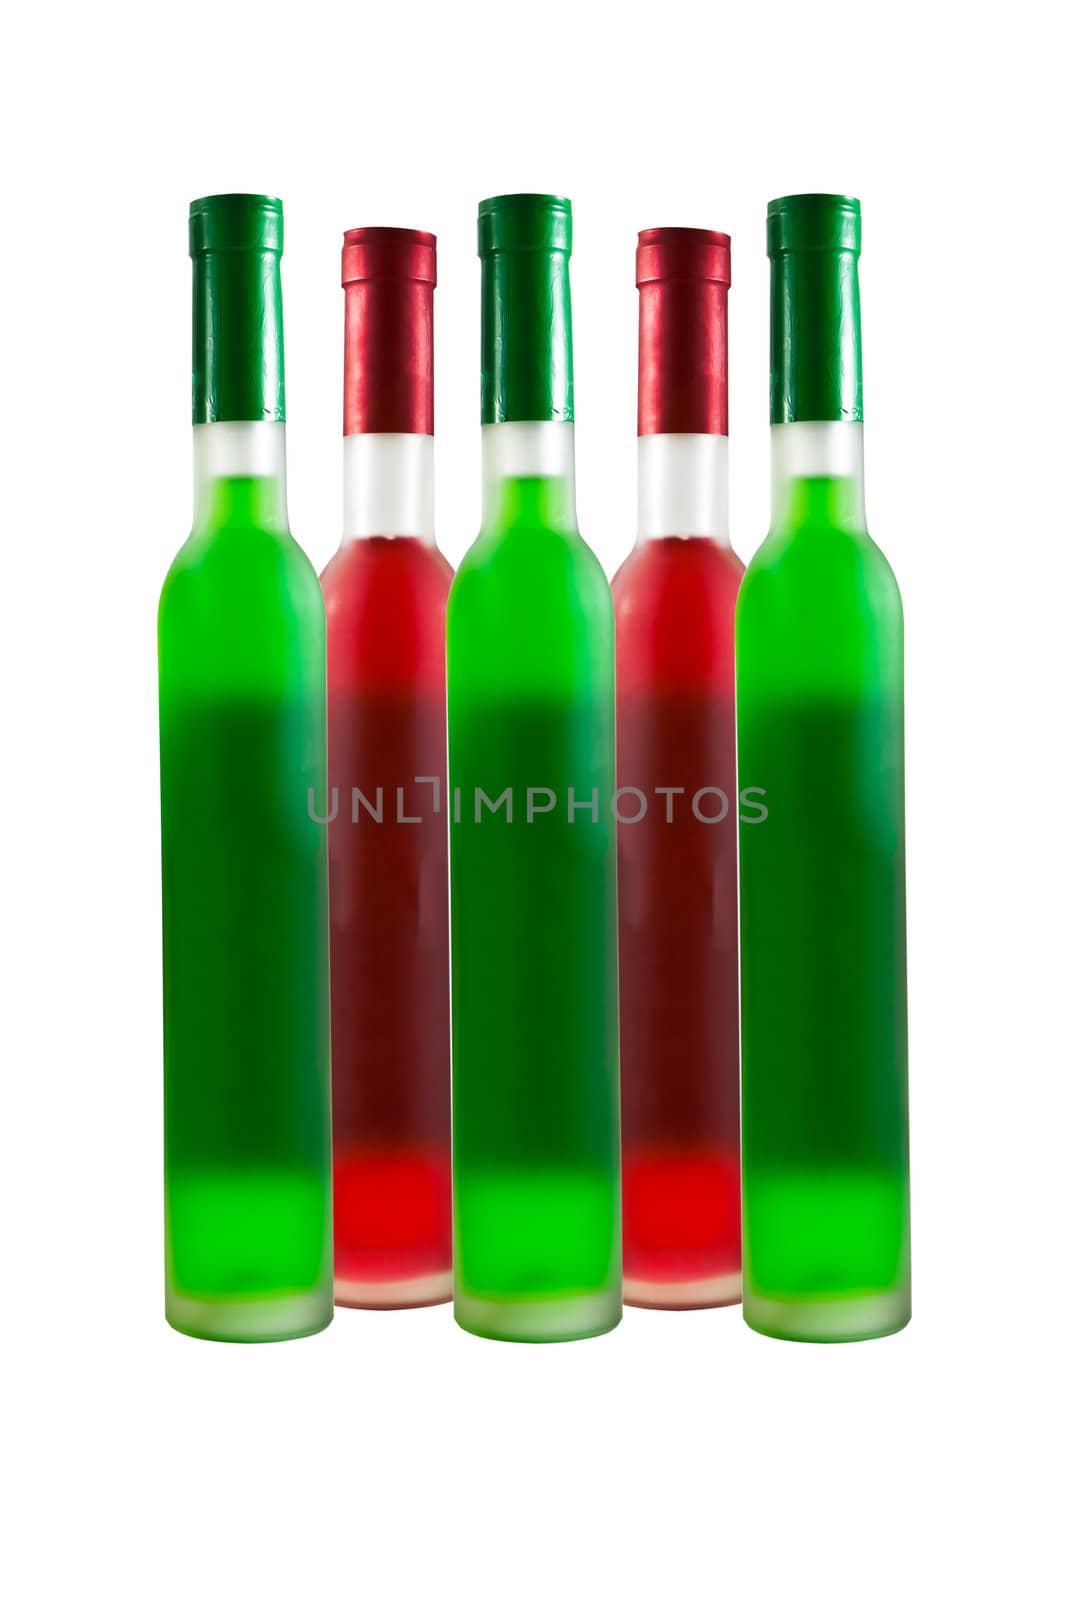 Green and Red wine bottles isolated on white.